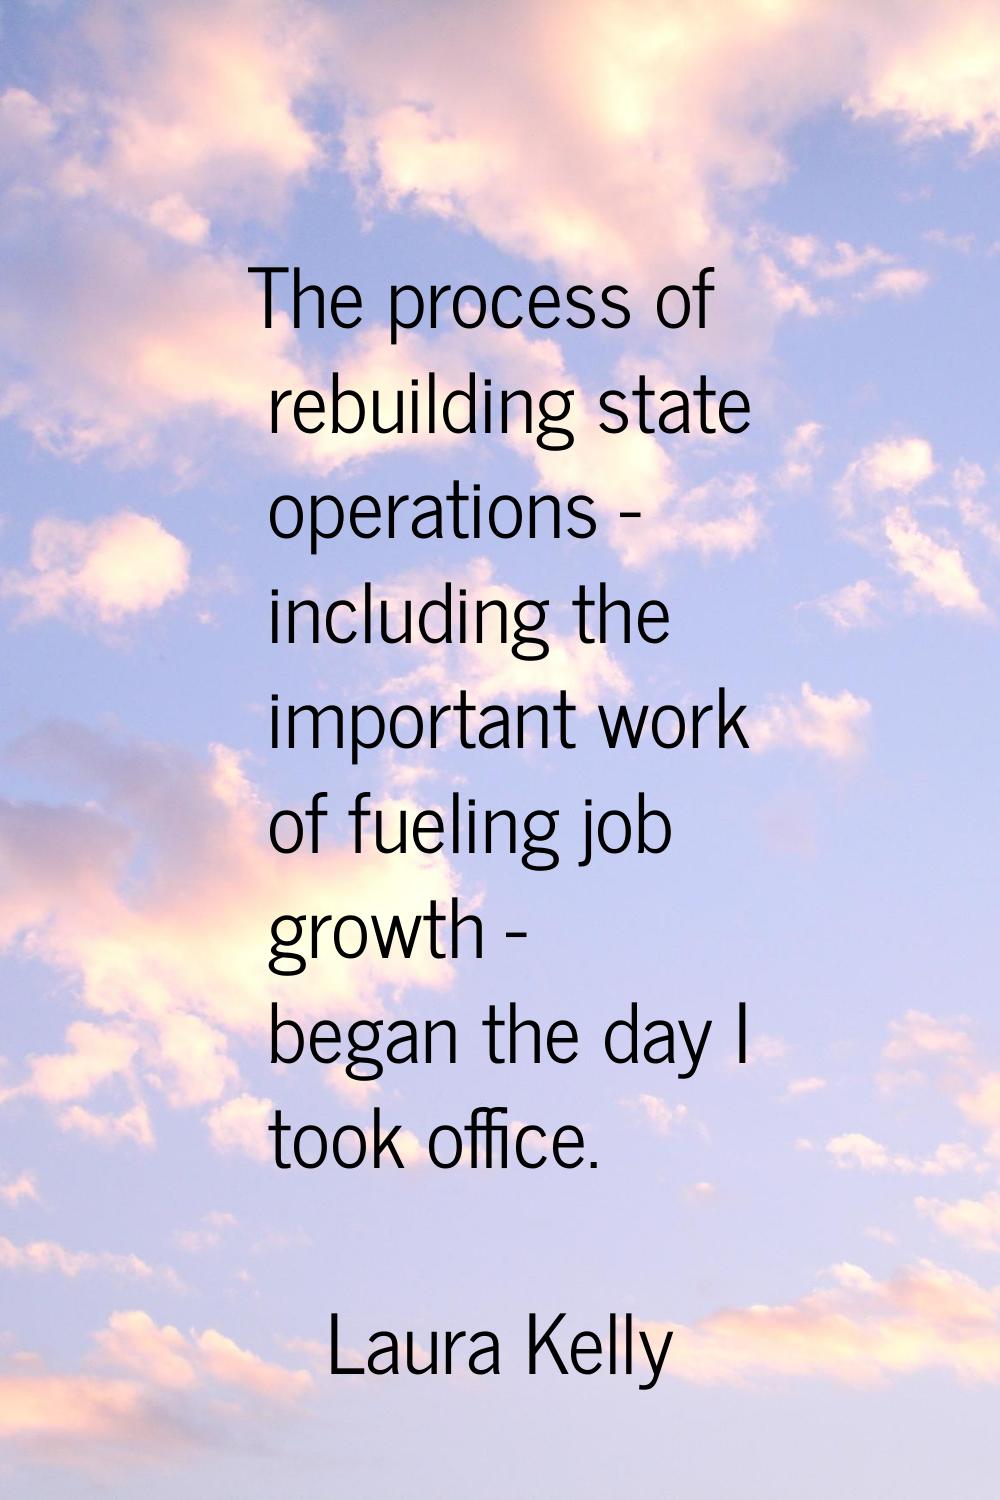 The process of rebuilding state operations - including the important work of fueling job growth - b